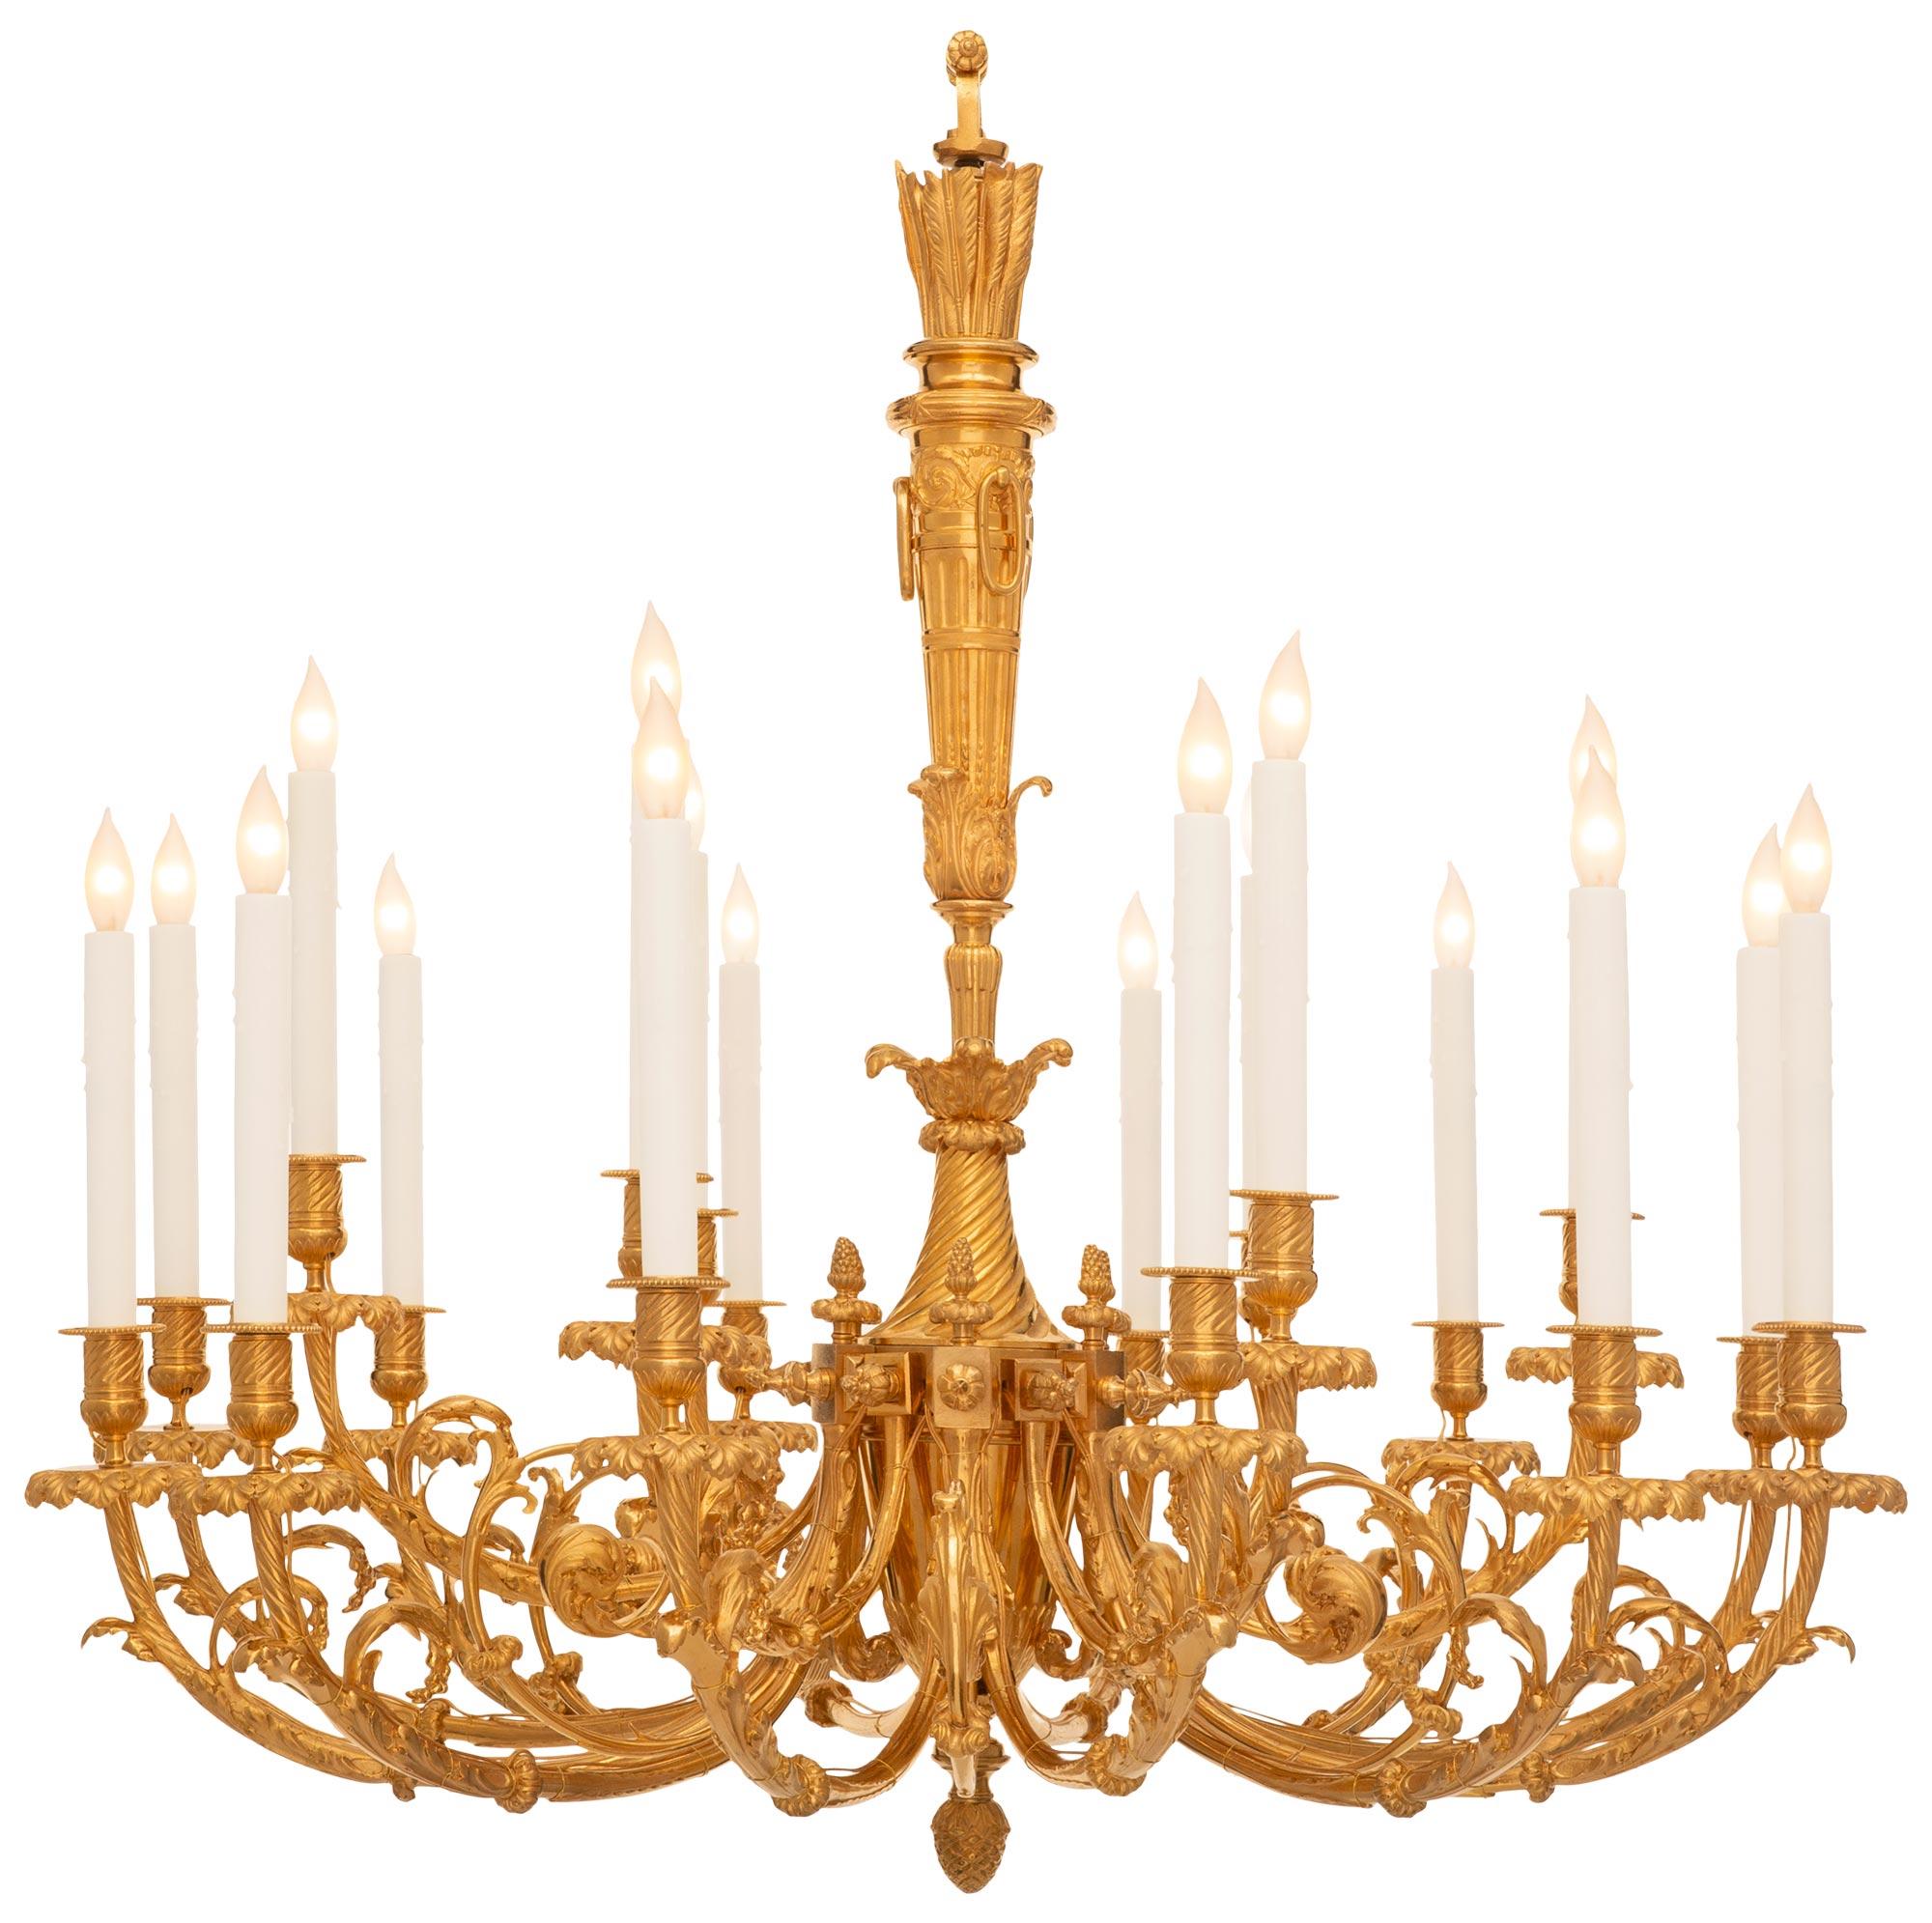 An elegant and large scaled French 19th century Louis XVI st. Ormolu chandelier. The eighteen light chandelier is centered by a richly chased bottom acorn finial leading up to the electrified arms split in two flanking 'C' scrolled arms ending with